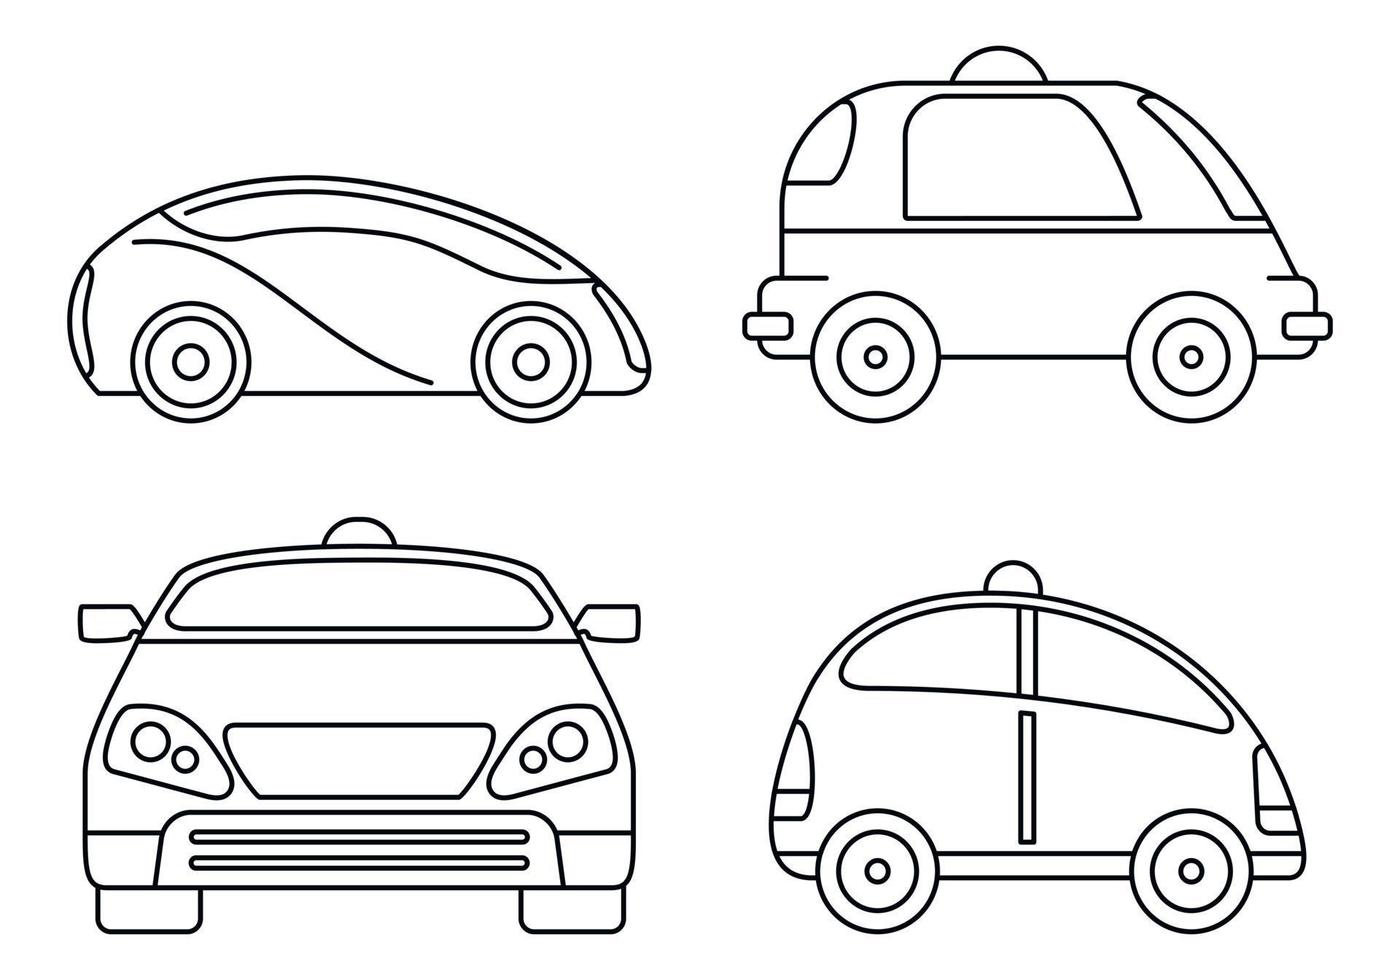 Driverless smart car icon set, outline style vector